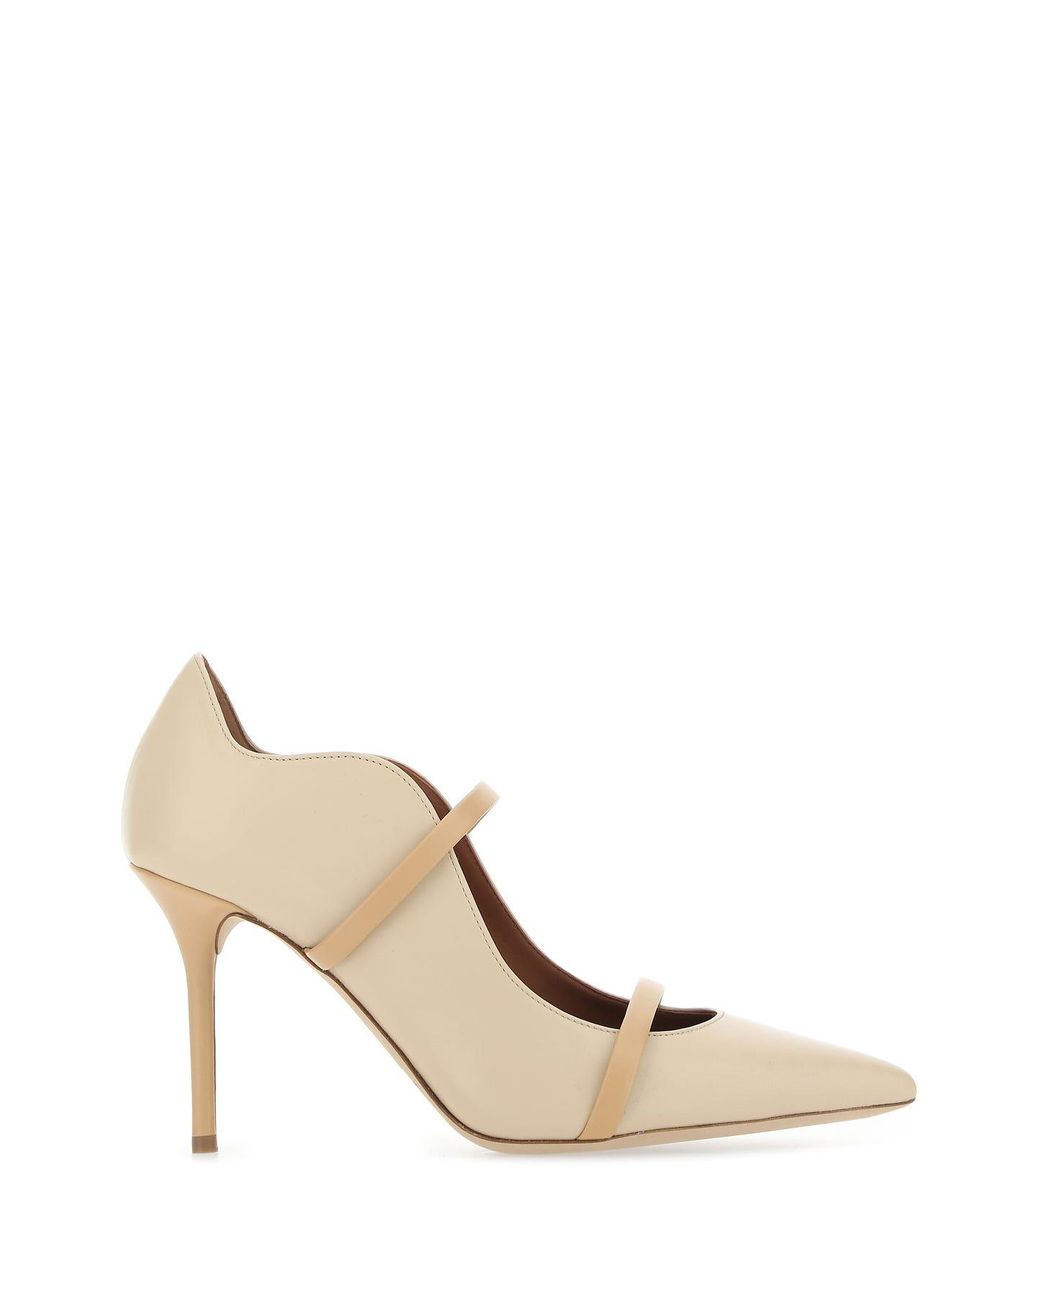 Malone Souliers Ivory Leather Maureen Pumps in White | Lyst